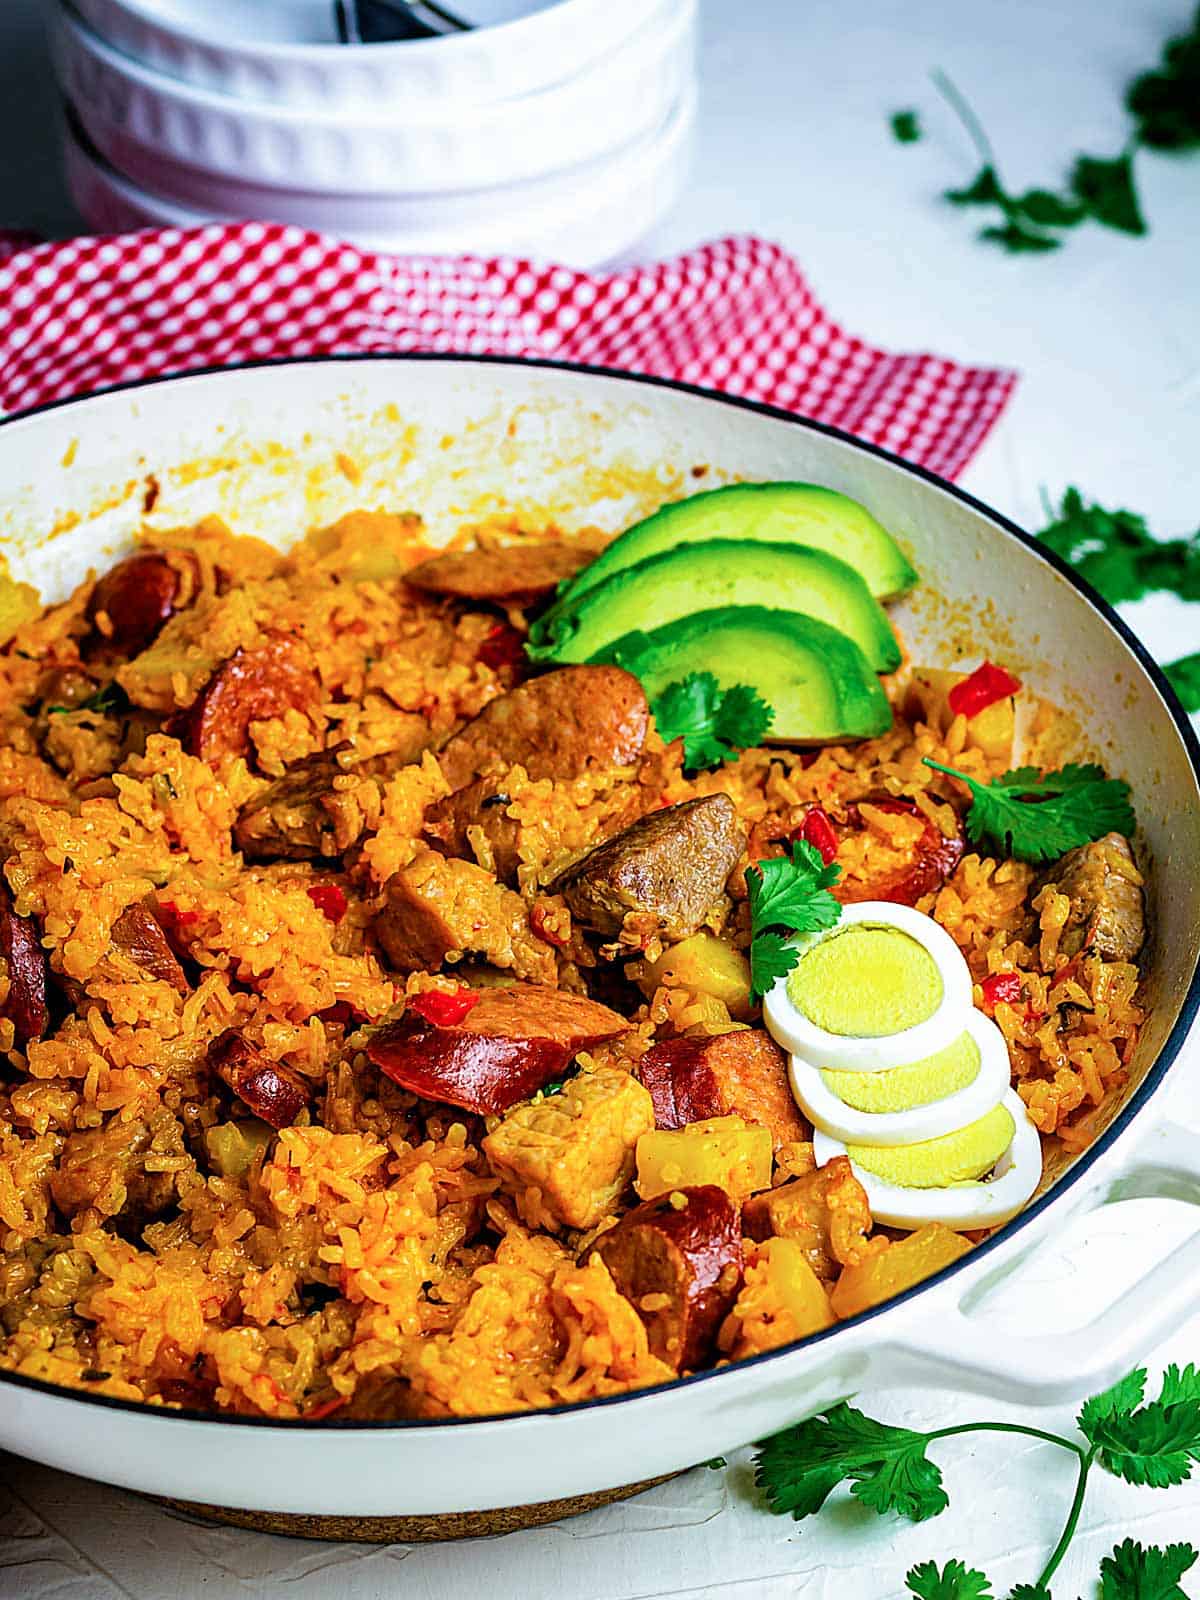 A closeup of the creamy Colombian-style rice dish with sausage and pork.